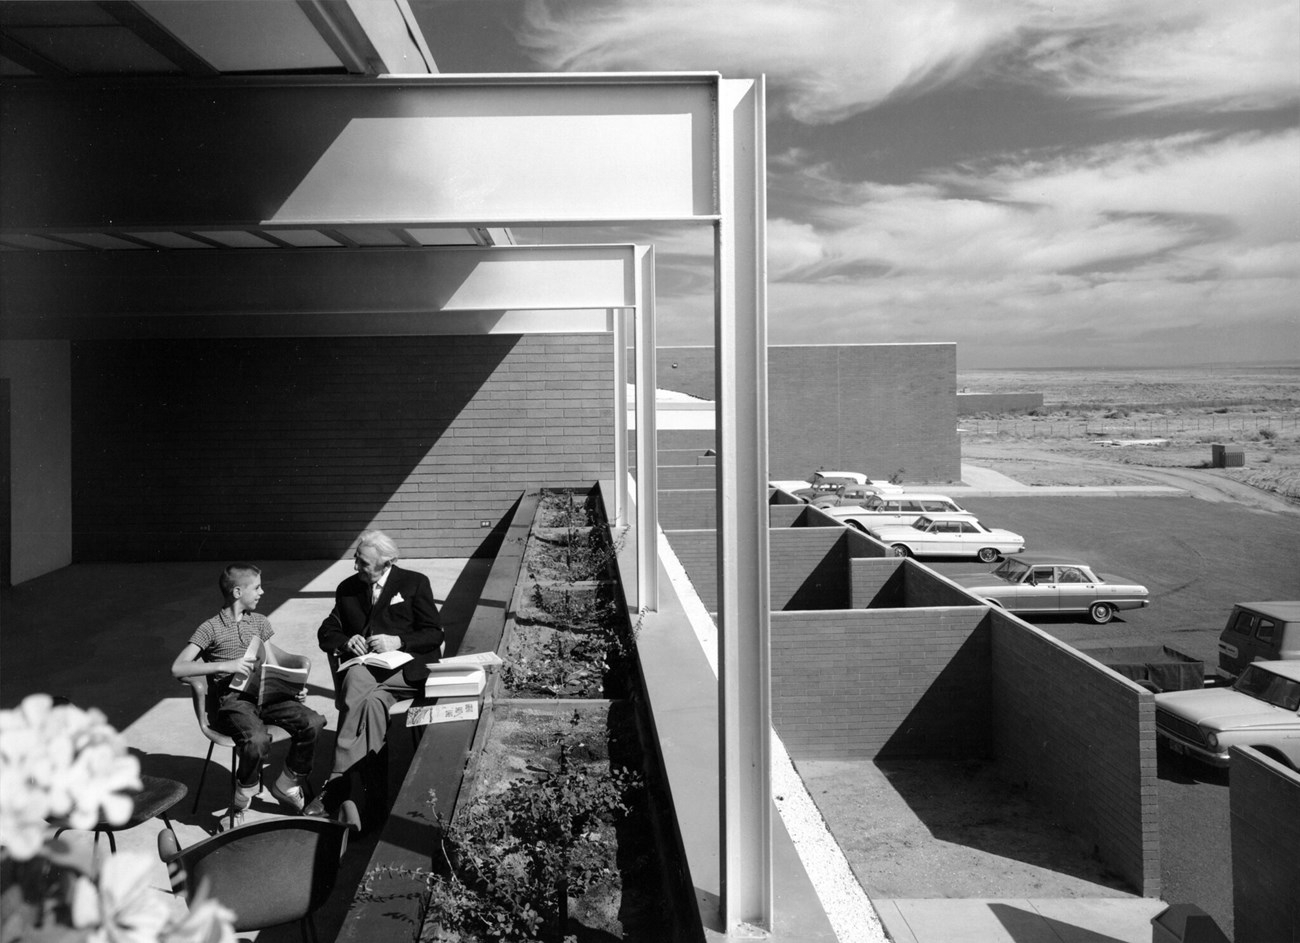 A man and a boy sit in chairs on an apartment balcony at the Painted Desert Community Complex, overlooking brick-walled courtyards and a parking lot